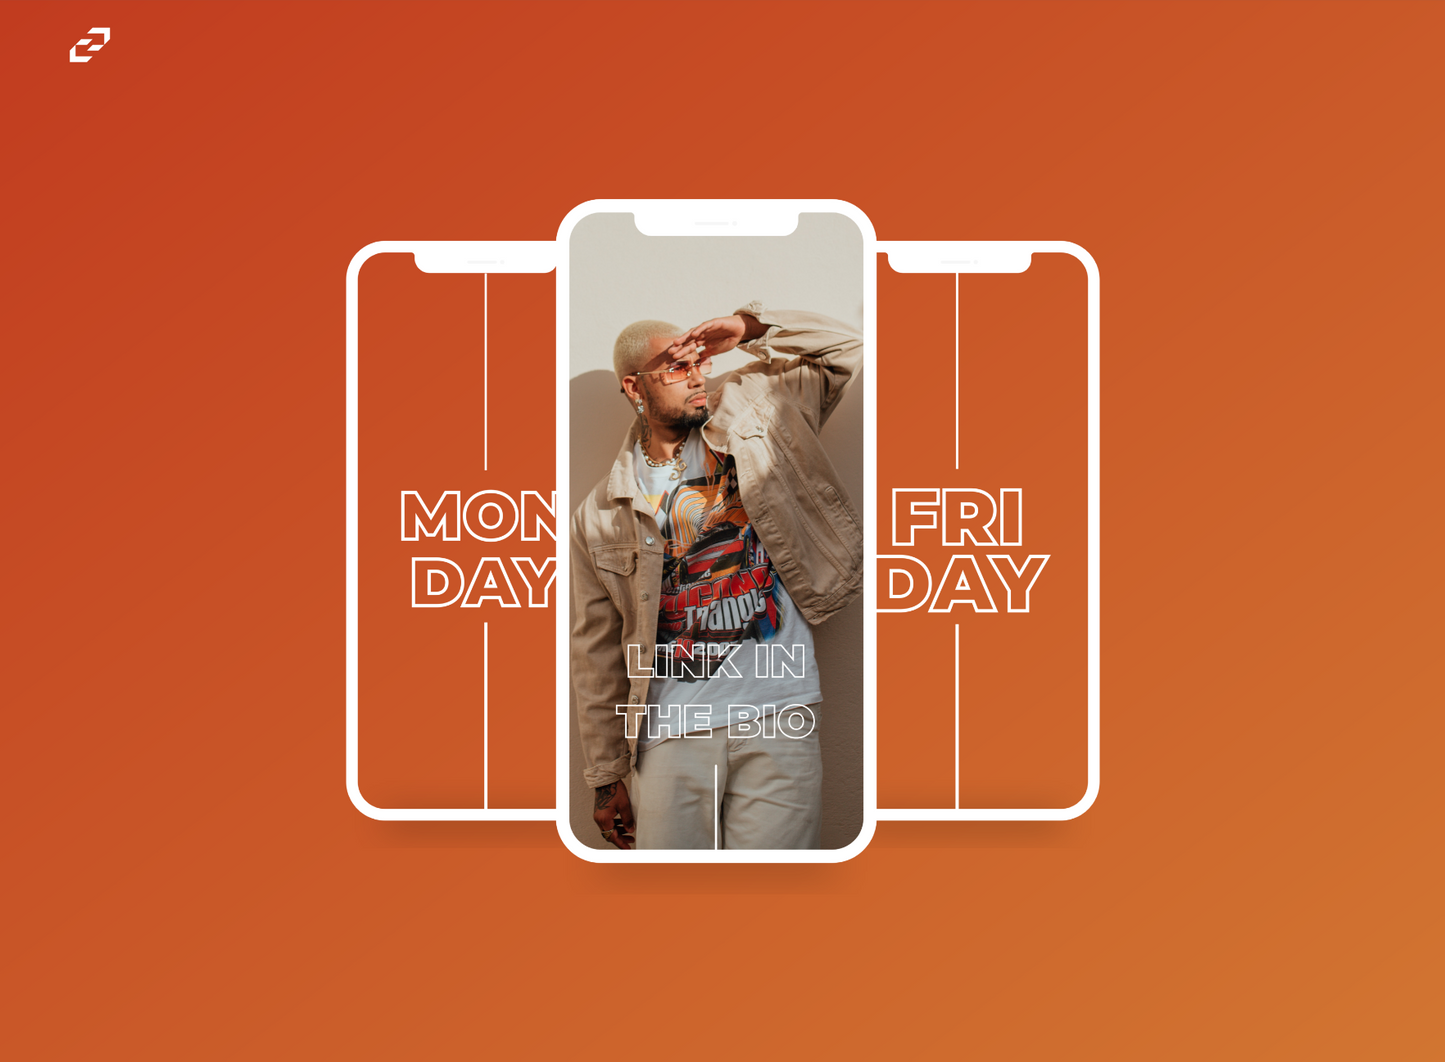 Instagram Story Graphic Overlays, Content Elements inc. days of week - CCreation Store